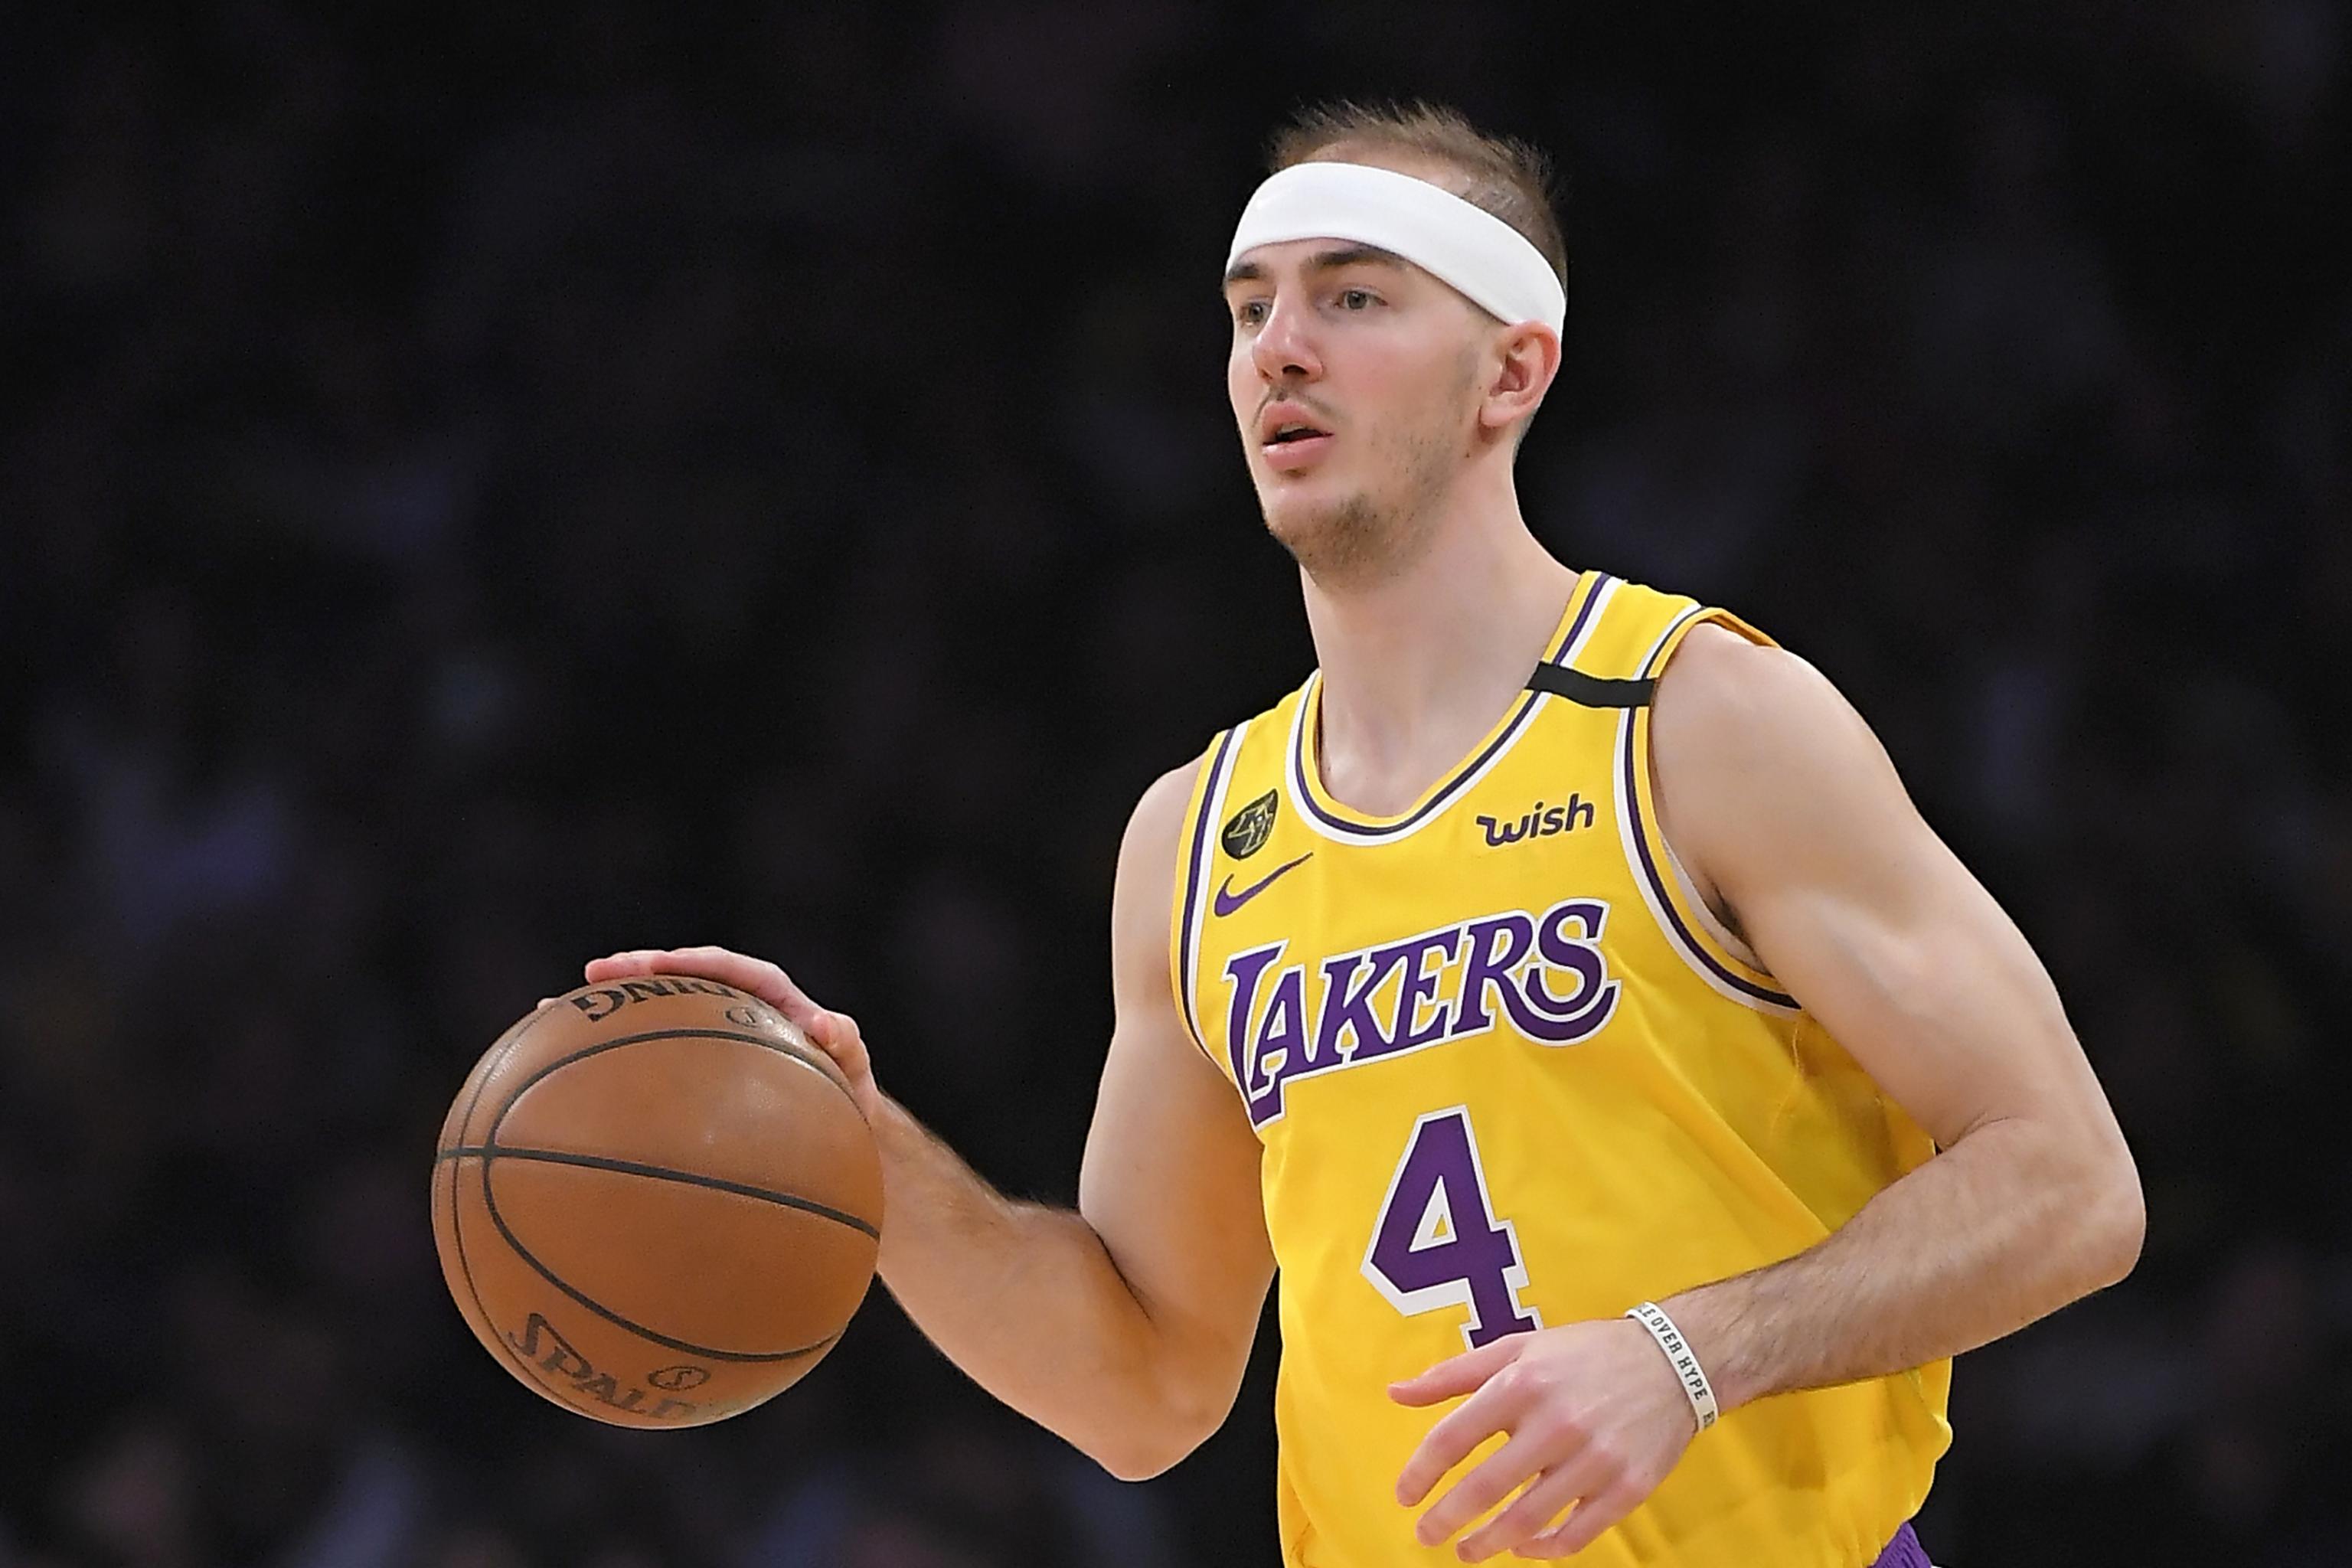 Lakers: It's about time Alex Caruso became the starting point guard